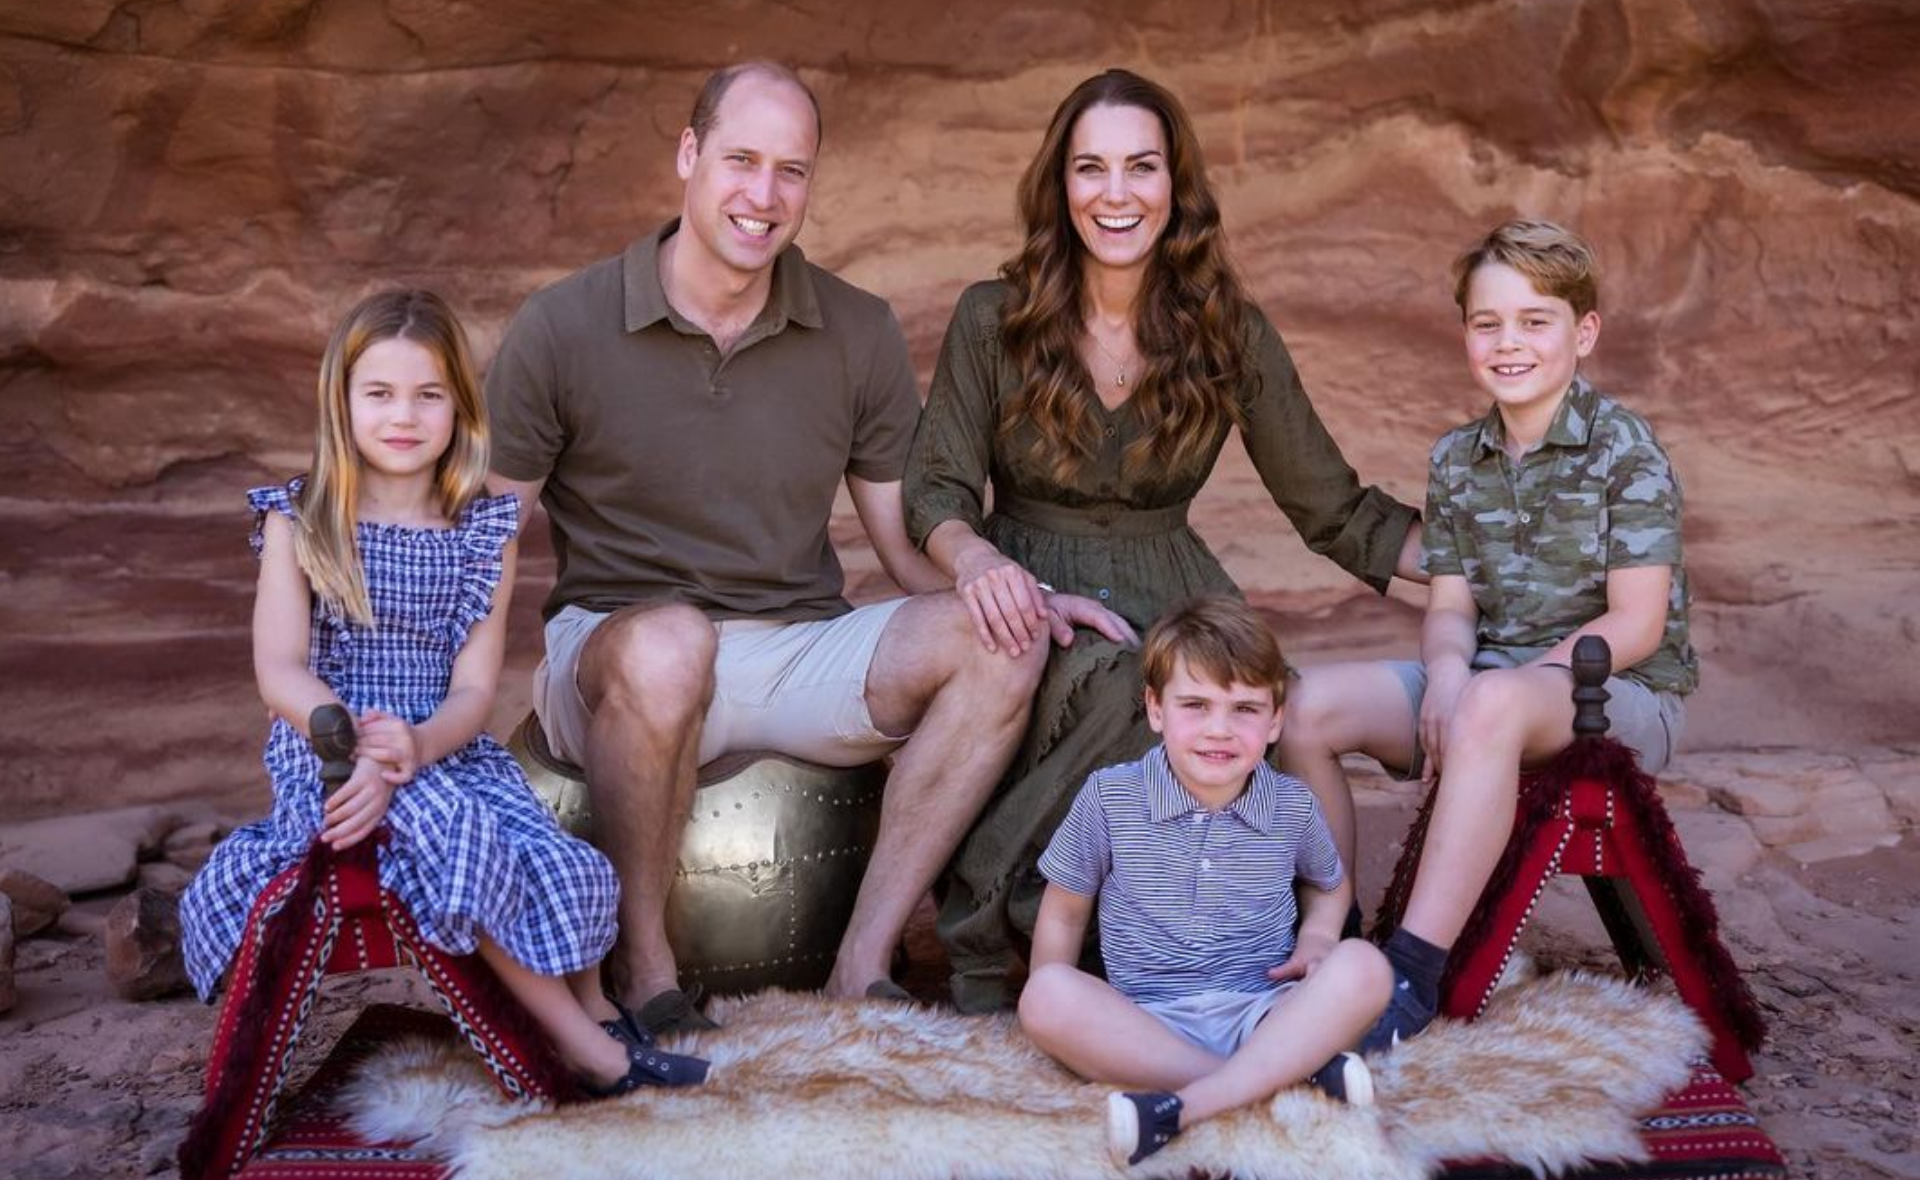 A throwback piece of jewellery, matching shoes and subtle PDA: All the details you missed in the Cambridges’ 2021 royal Christmas card photo